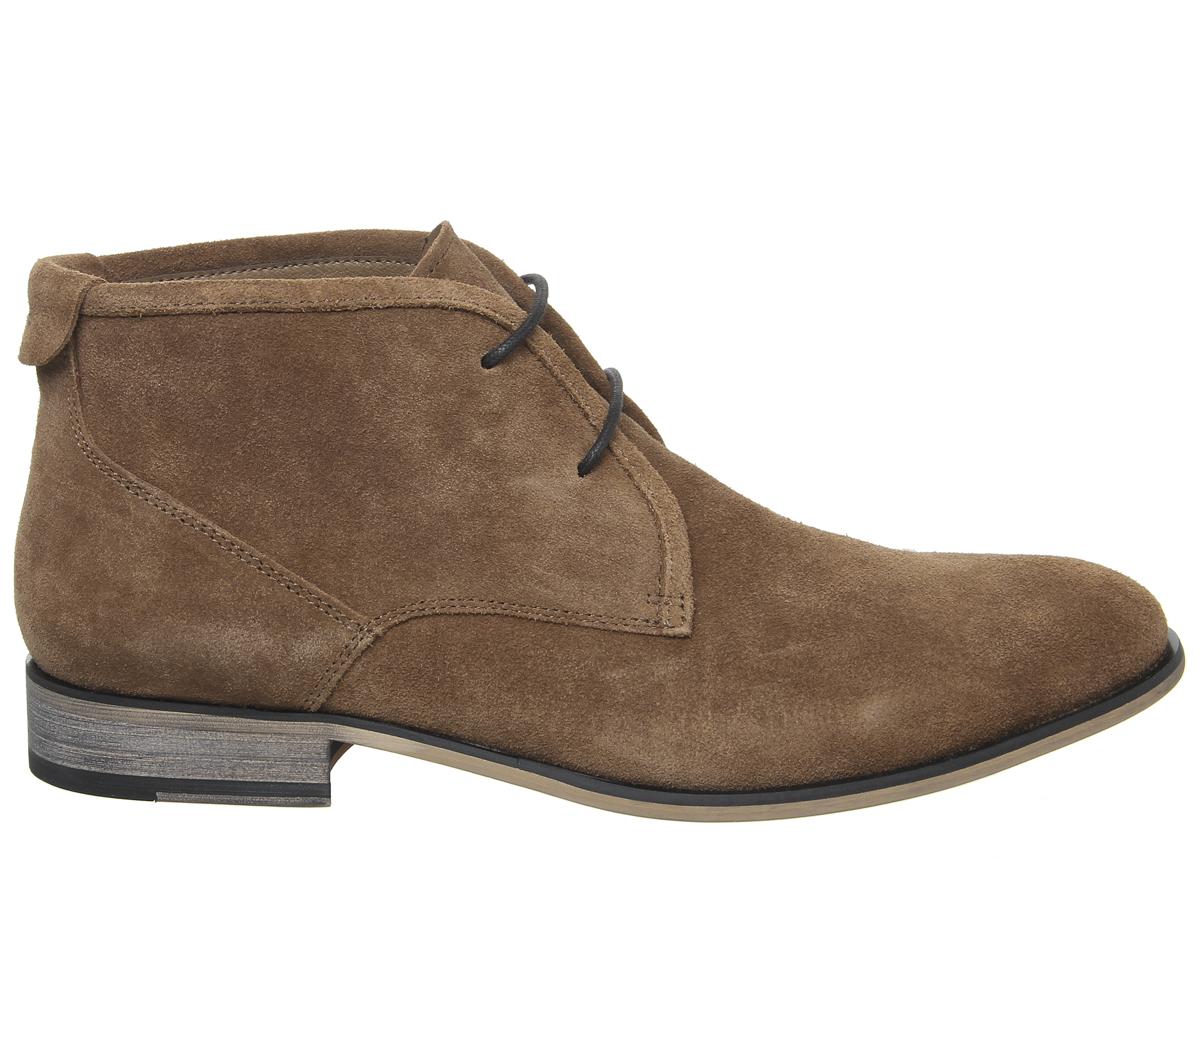 OFFICE Barker Chukka Boots Tan Suede - Men’s Boots